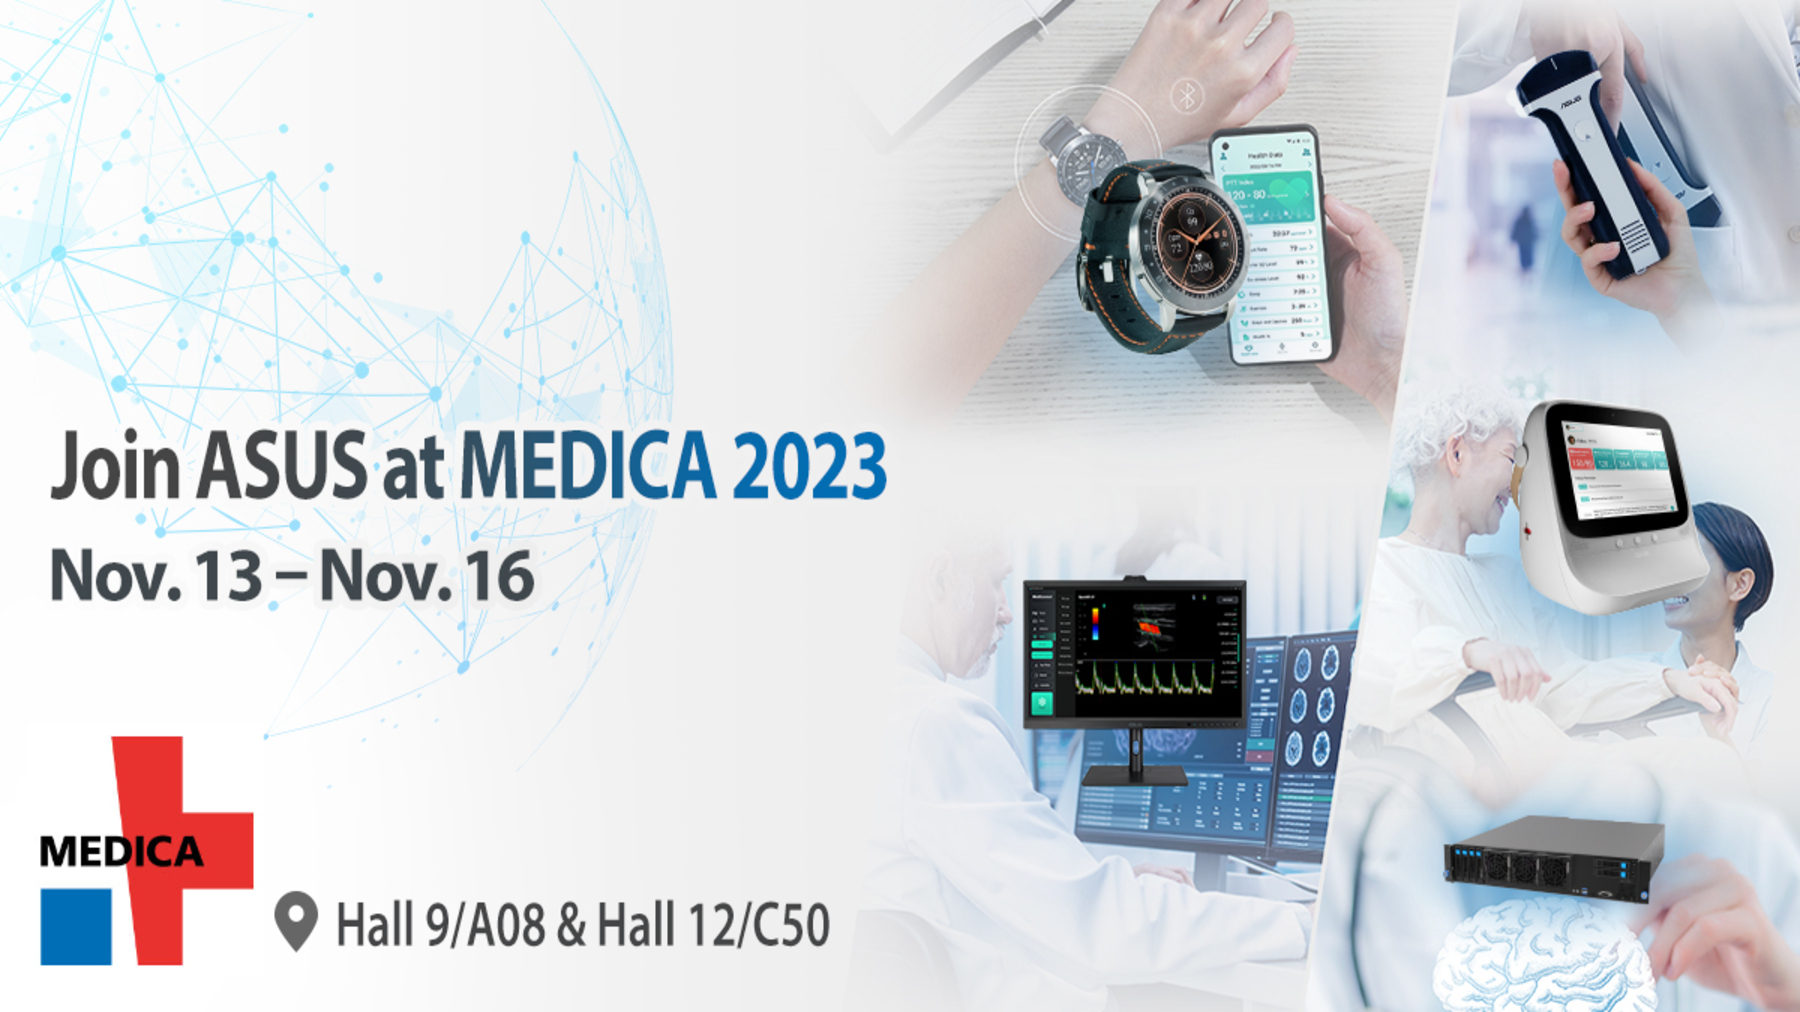 ASUS Smart Healthcare Product Lineup for MEDICA 2023